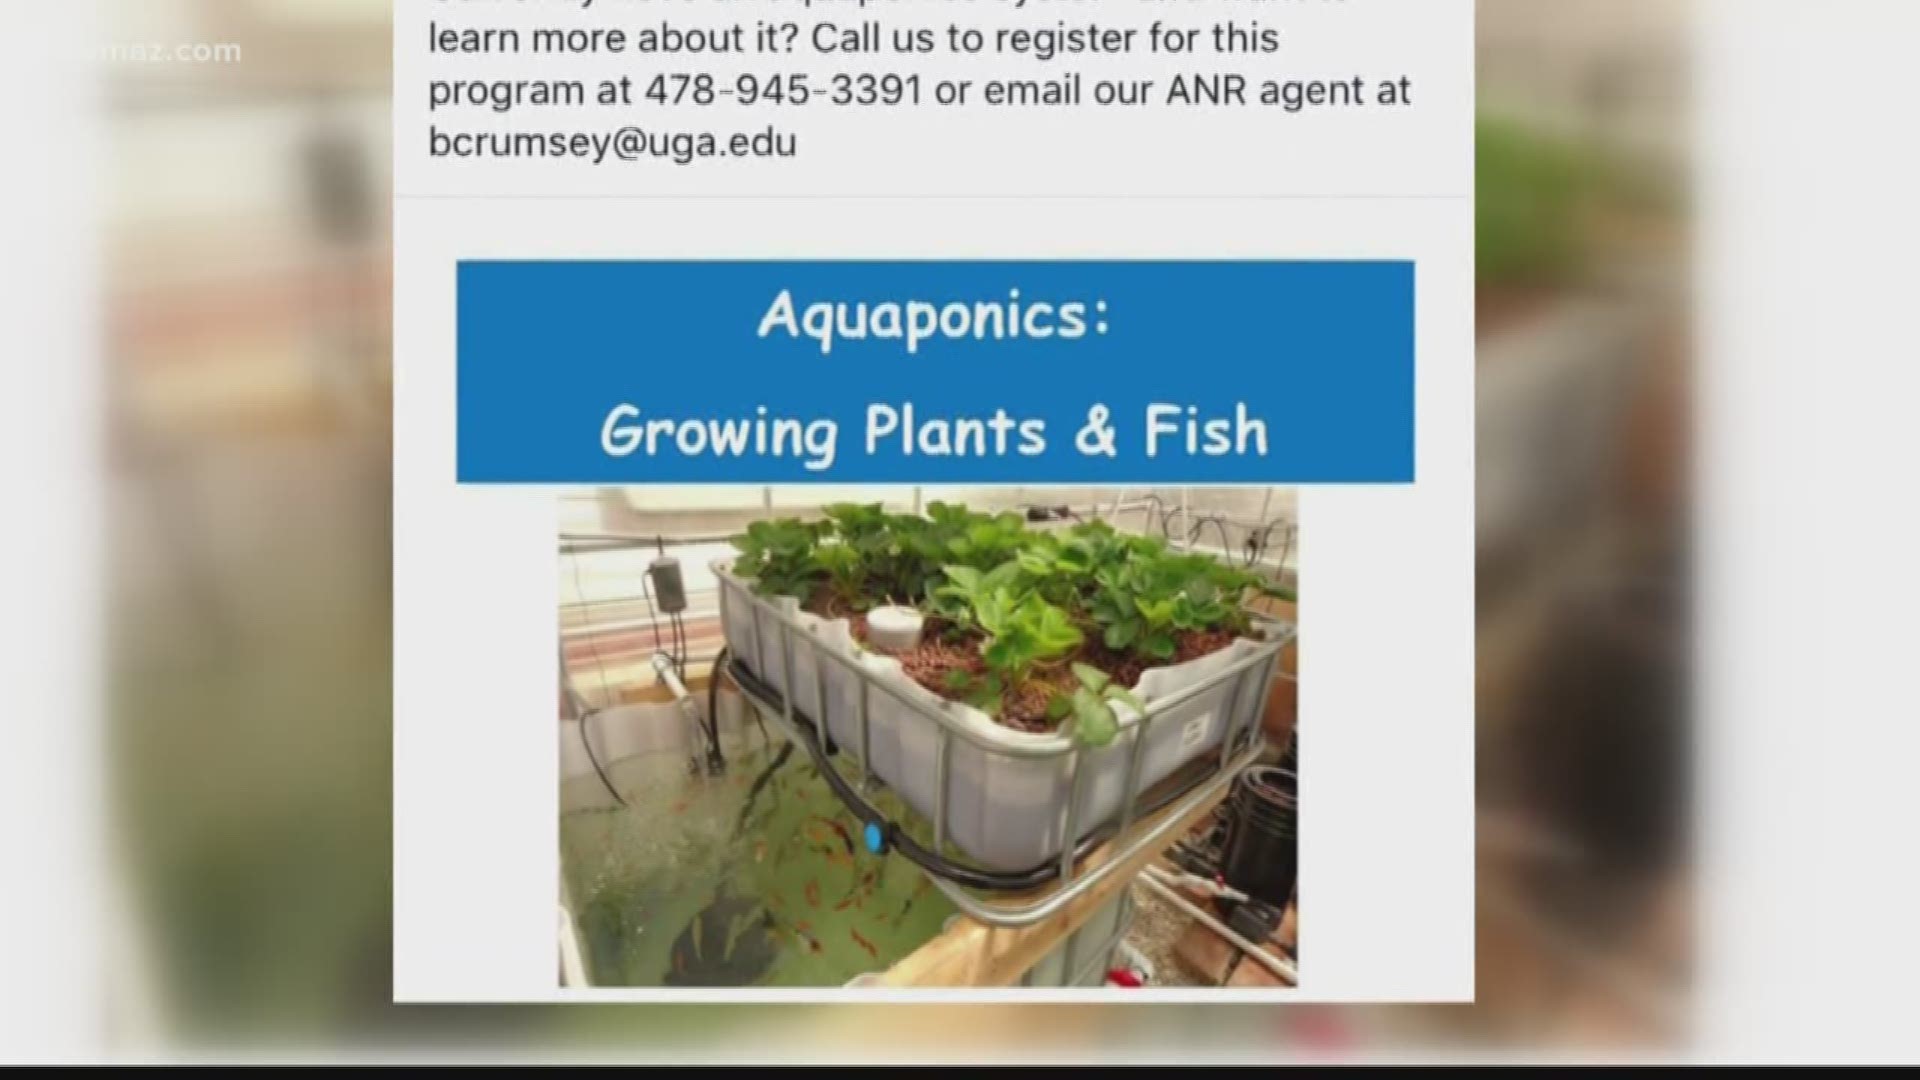 Some Twiggs County families are using a special system to grow fresh food. Aquaponics is a system that involves fish and plants working together so they can grow together.